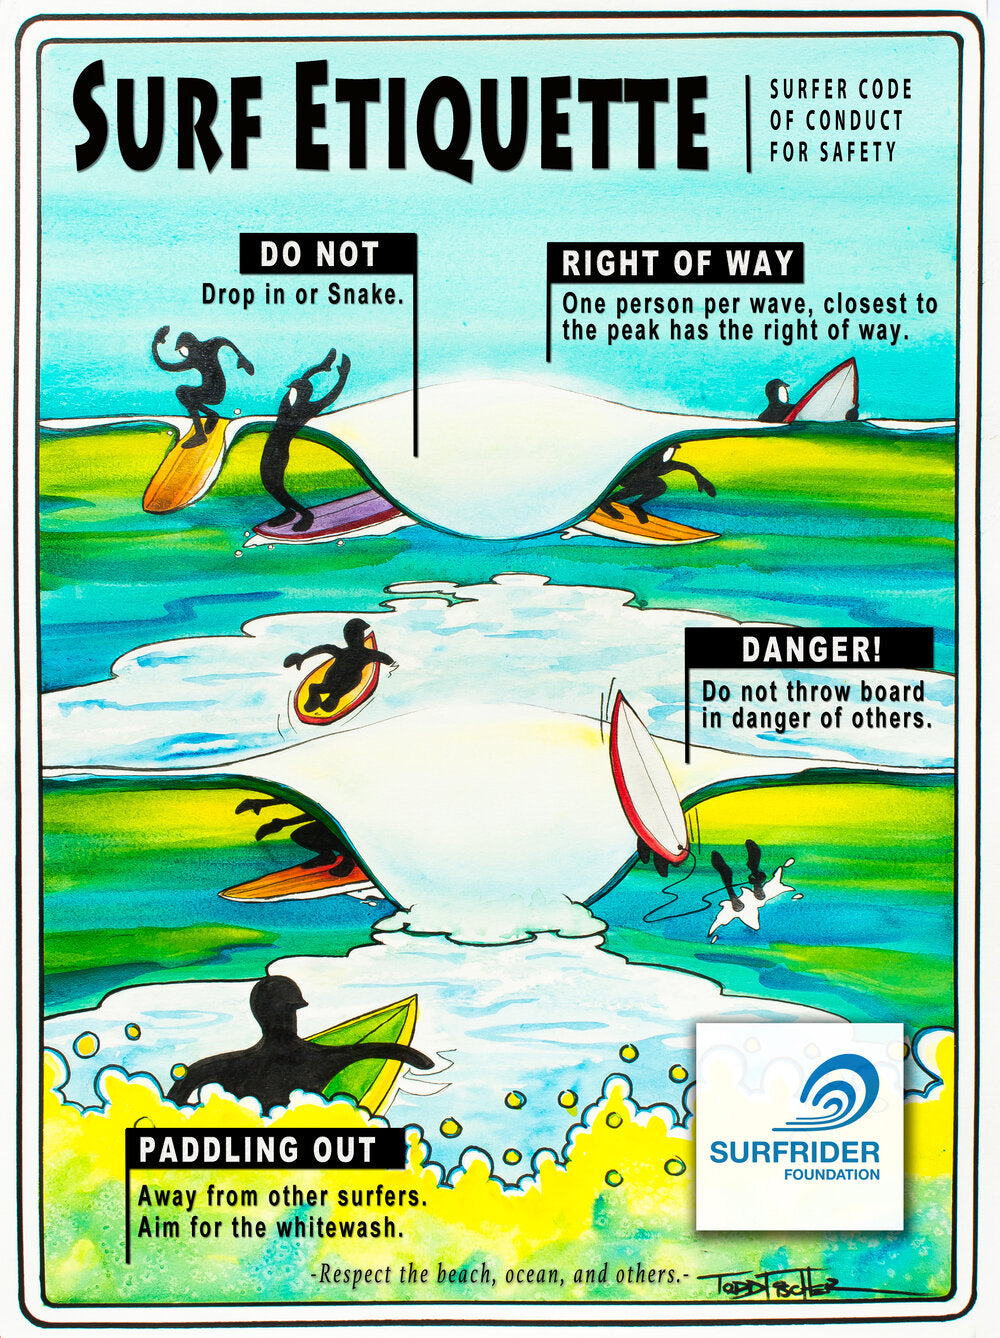 Surf Etiquette Poster by Todd Fischer - Surfer Code of Conduct For Safety